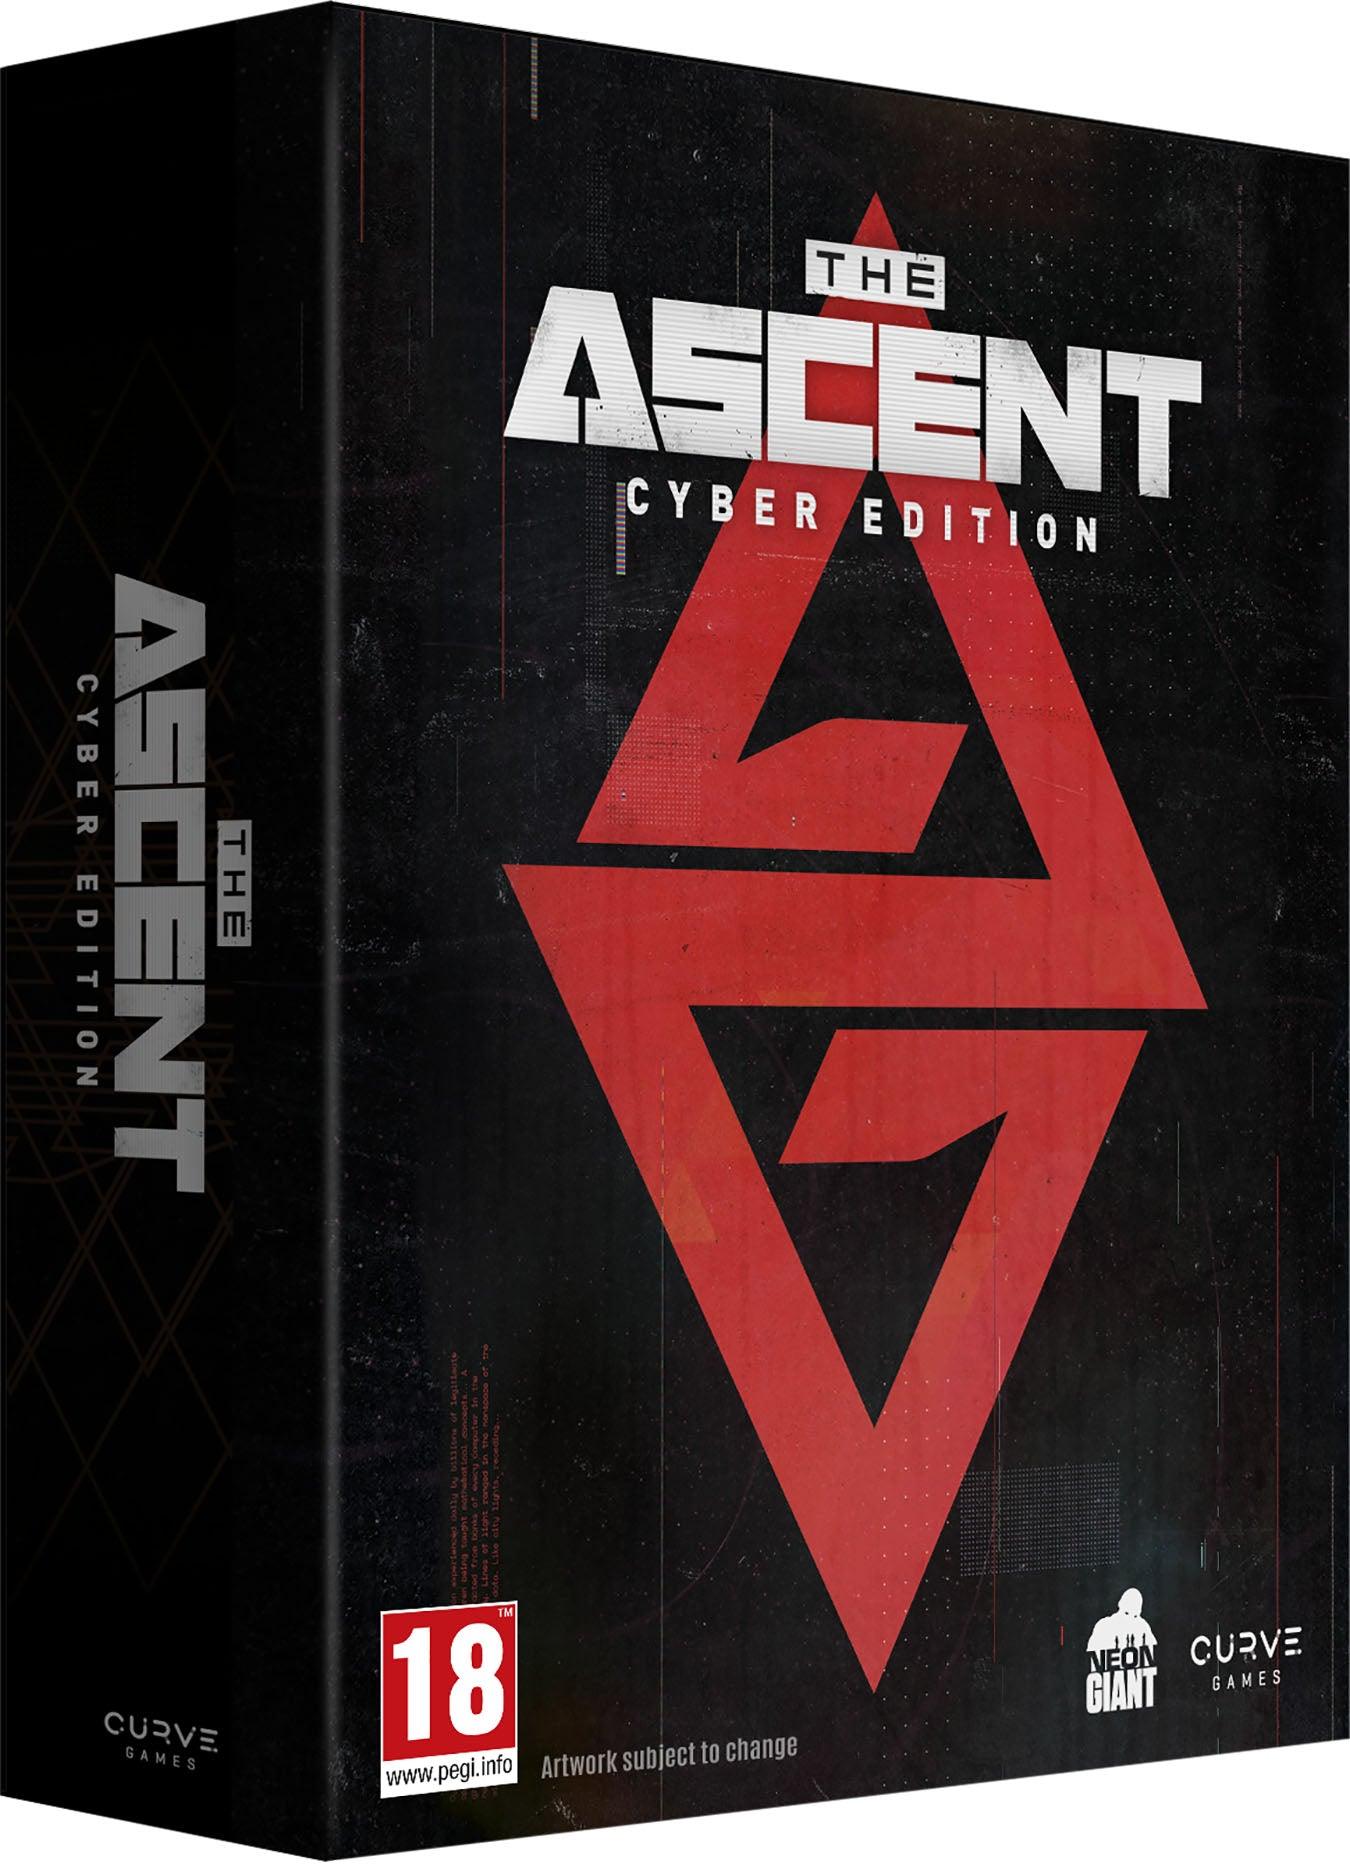 The Ascent Cyber Edition - Want a New Gadget